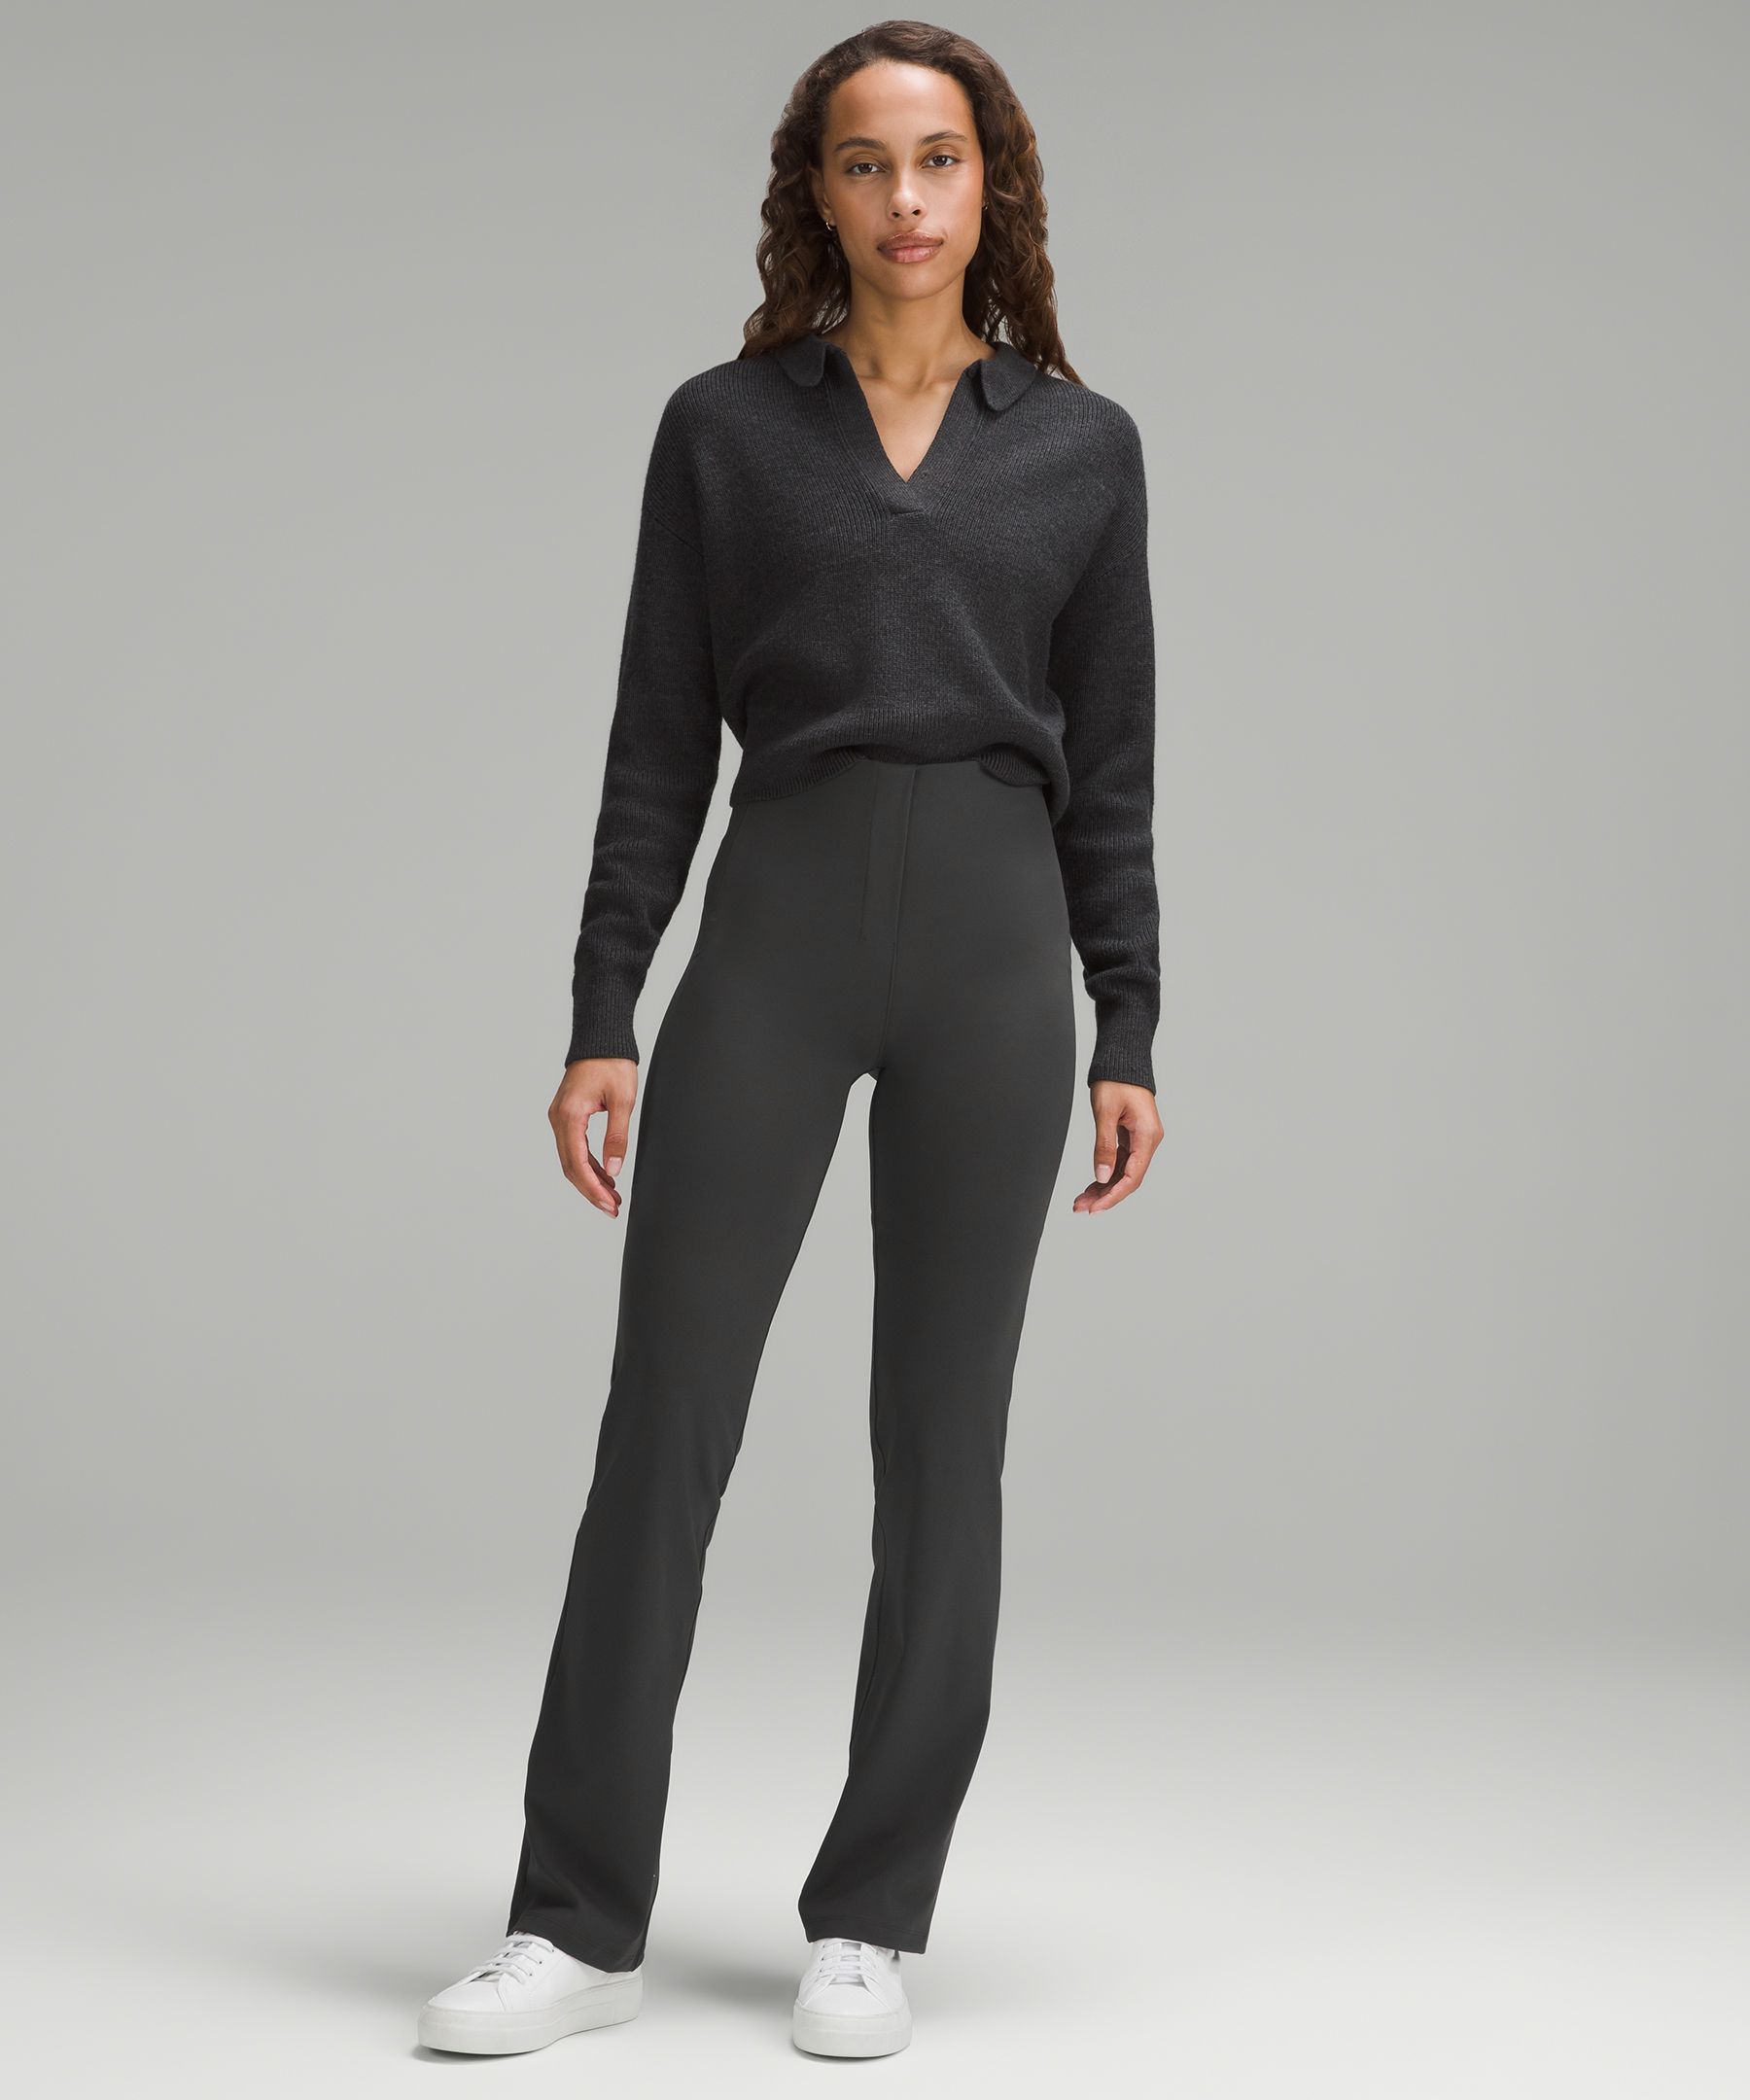 Lululemon athletica Smooth Fit Pull-On High-Rise Pant *Tall